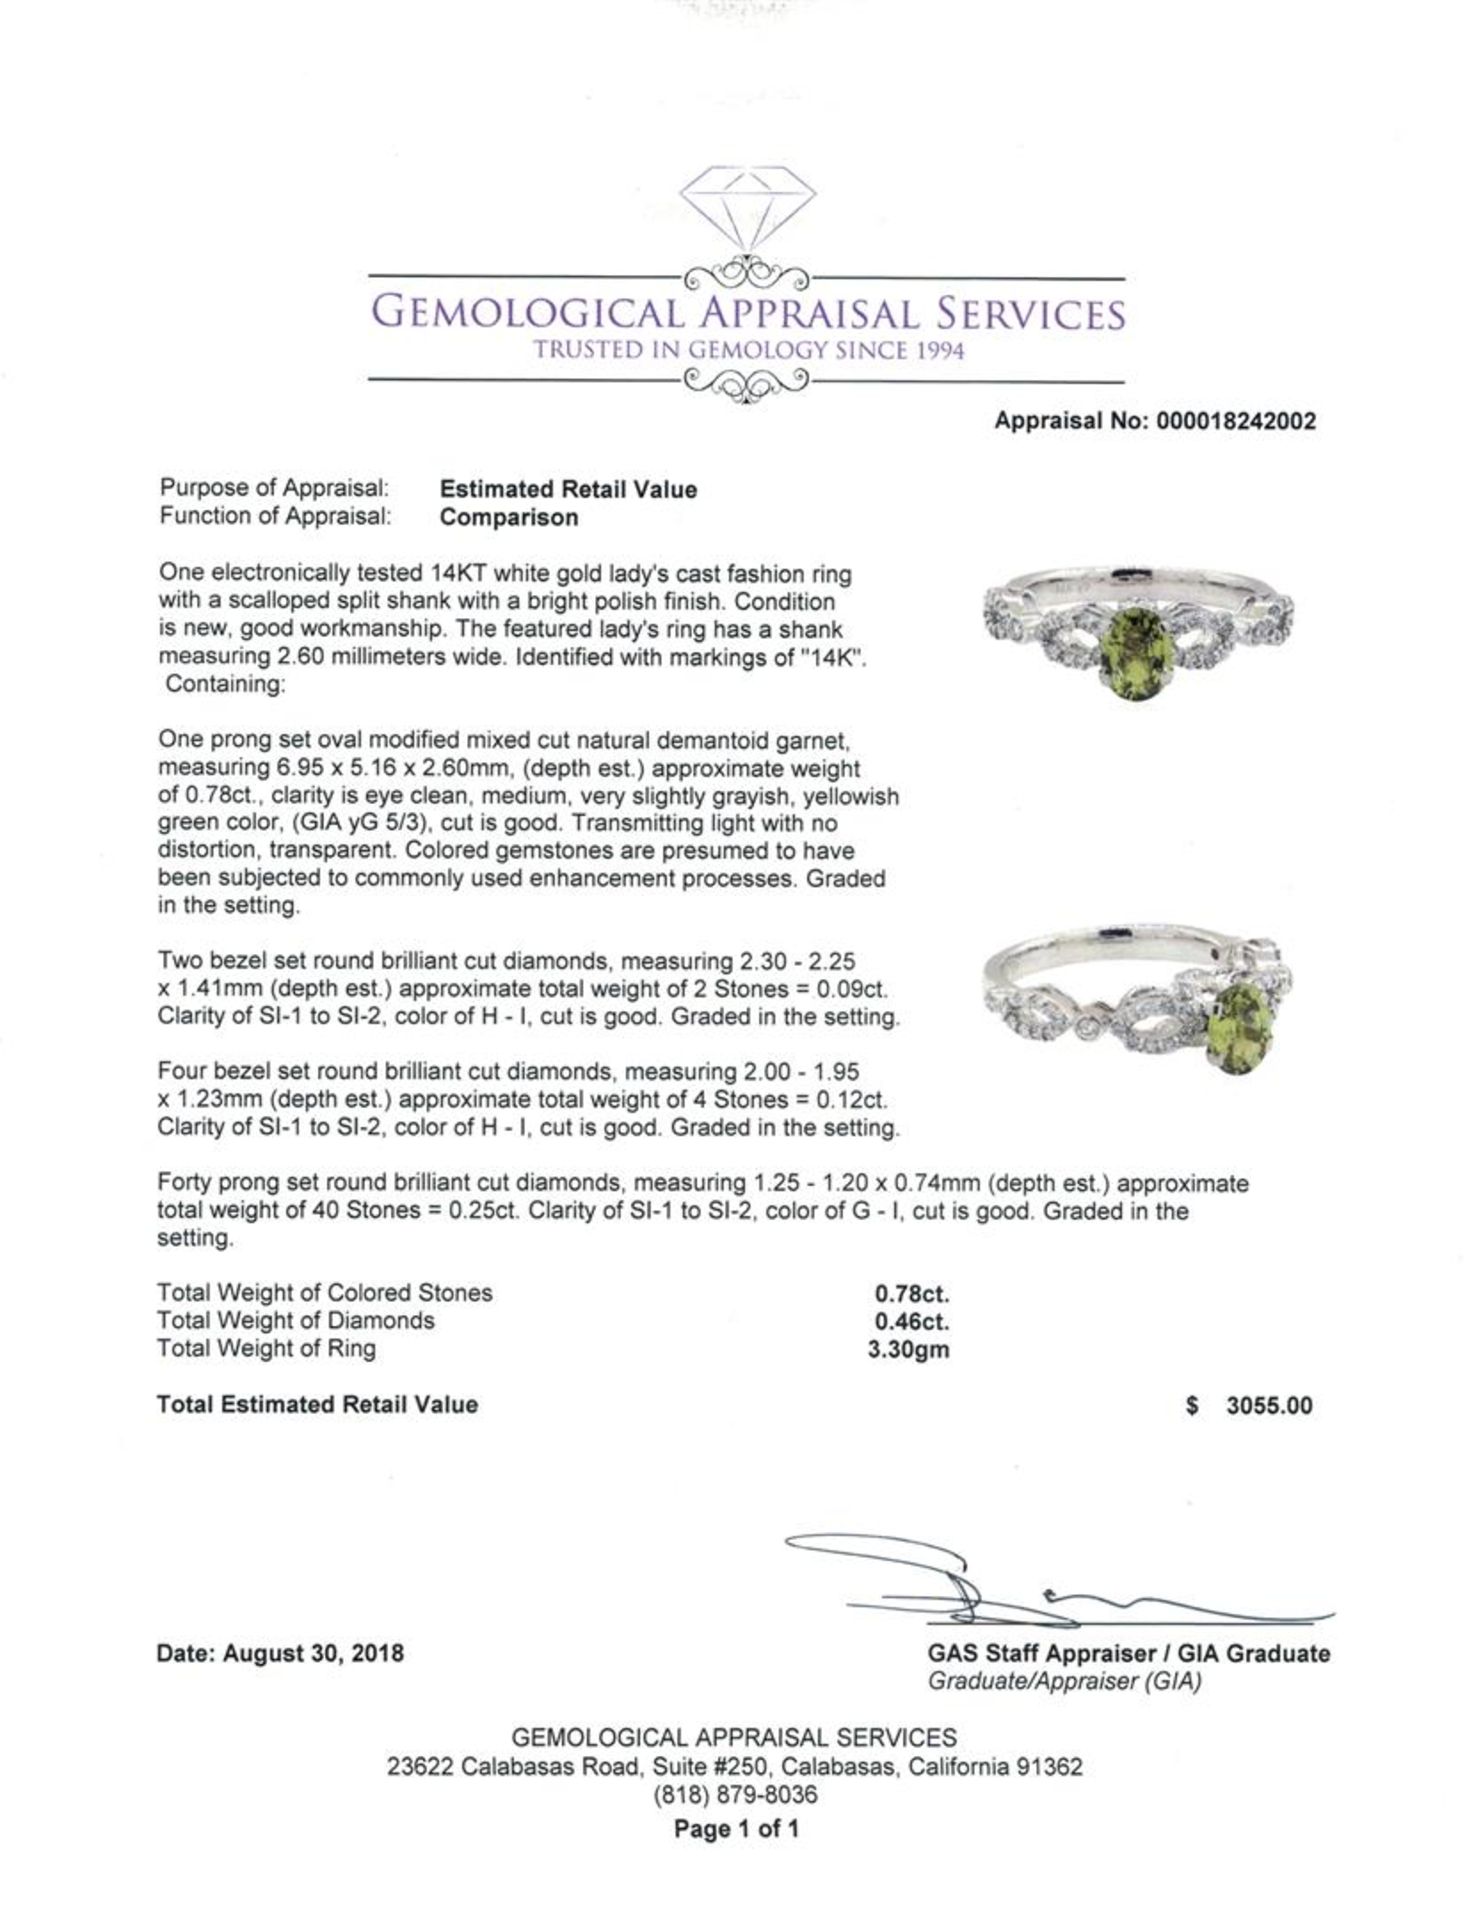 1.24 ctw Oval Mixed Demantoid Garnet And Round Brilliant Cut Diamond Ring - 14KT - Image 5 of 5